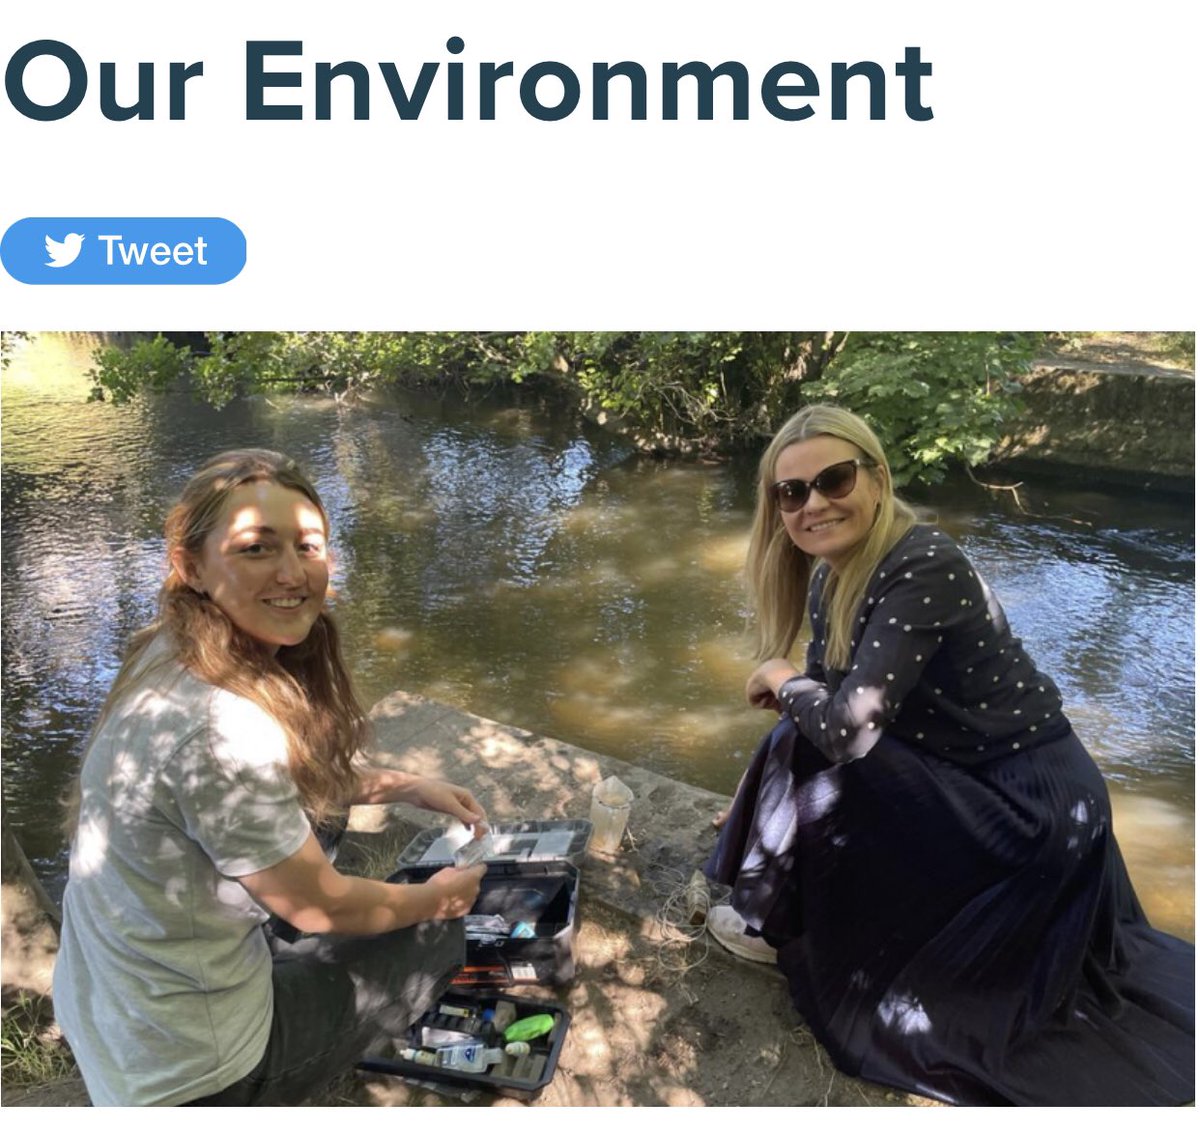 This is my MP @Laura__Farris she professes on her website to care about the environment. She just voted in favour of allowing water companies to pump raw sewage into our rivers and seas for the next 15 years! #TurdReich #TorySewageParty